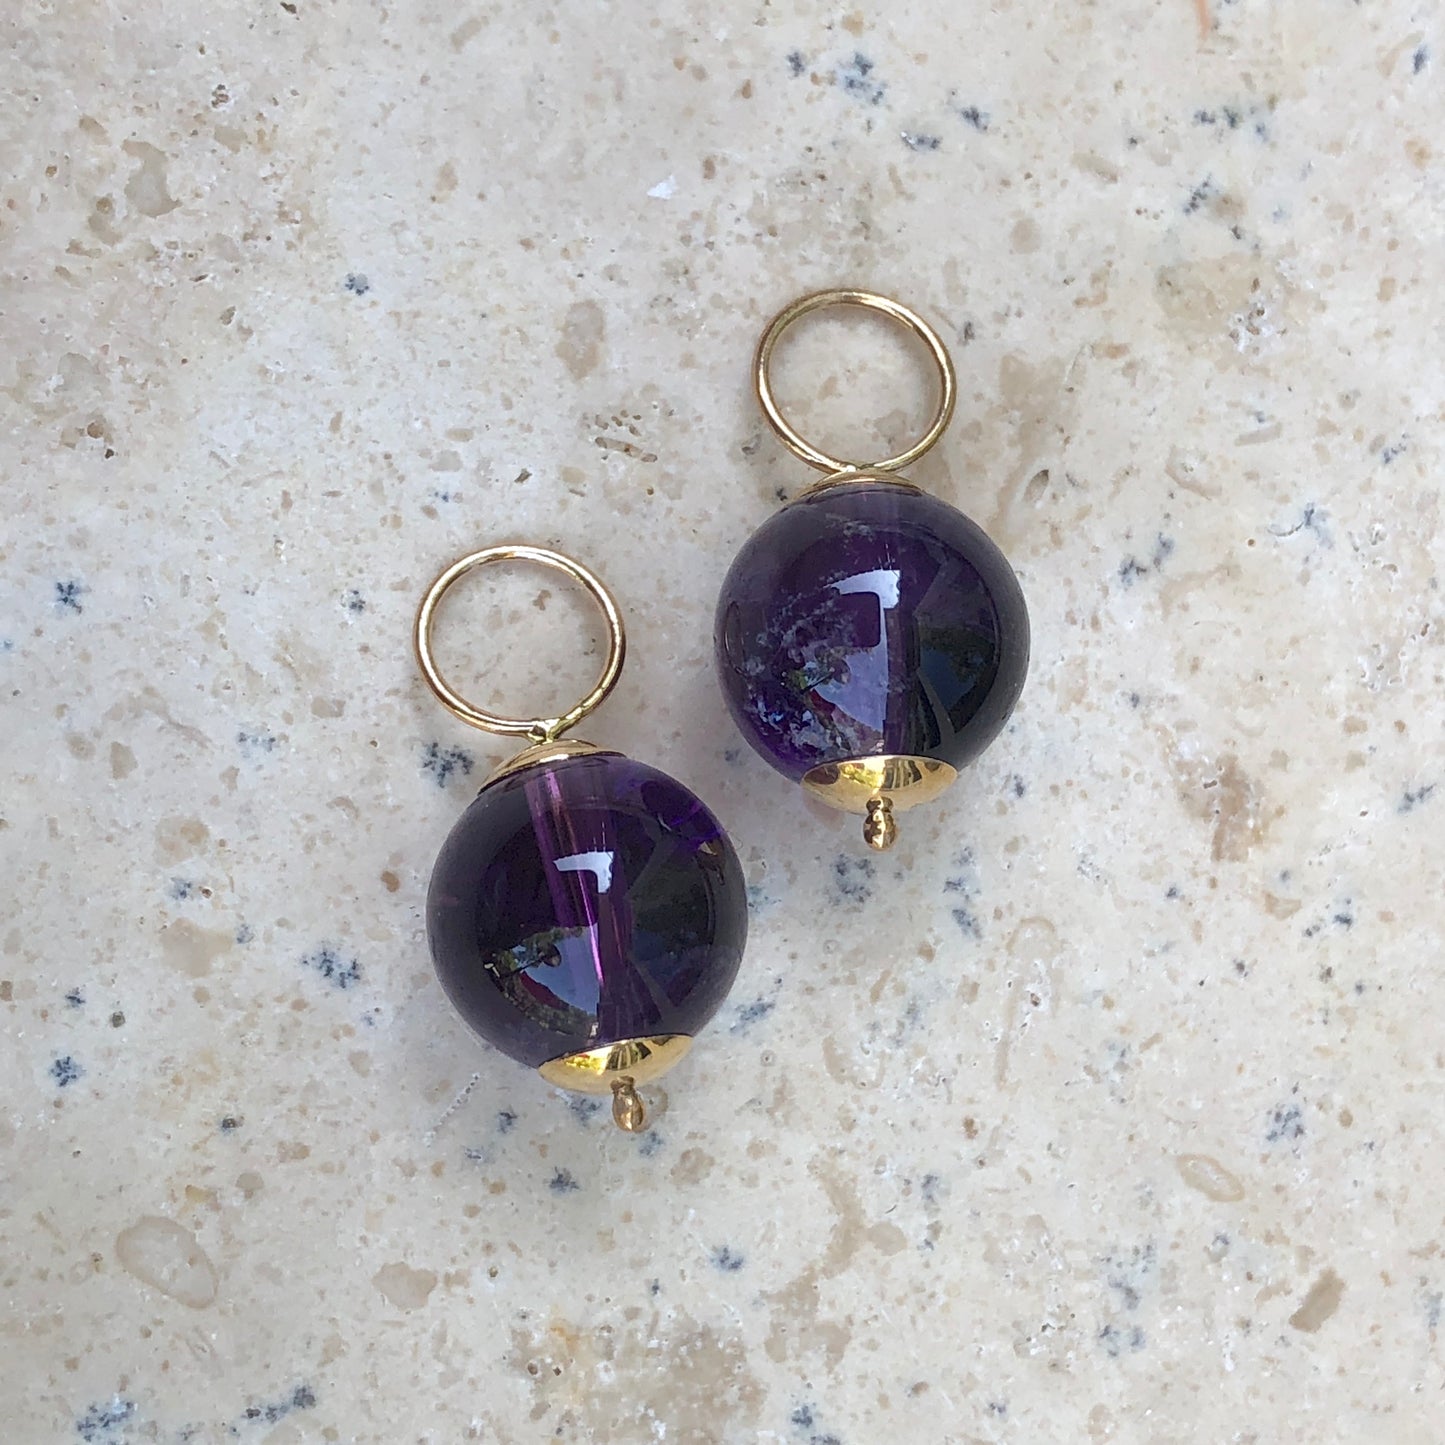 14KT Yellow Gold + Amethyst Ball Earring Charms, 14KT Yellow Gold + Amethyst Ball Earring Charms - Legacy Saint Jewelry